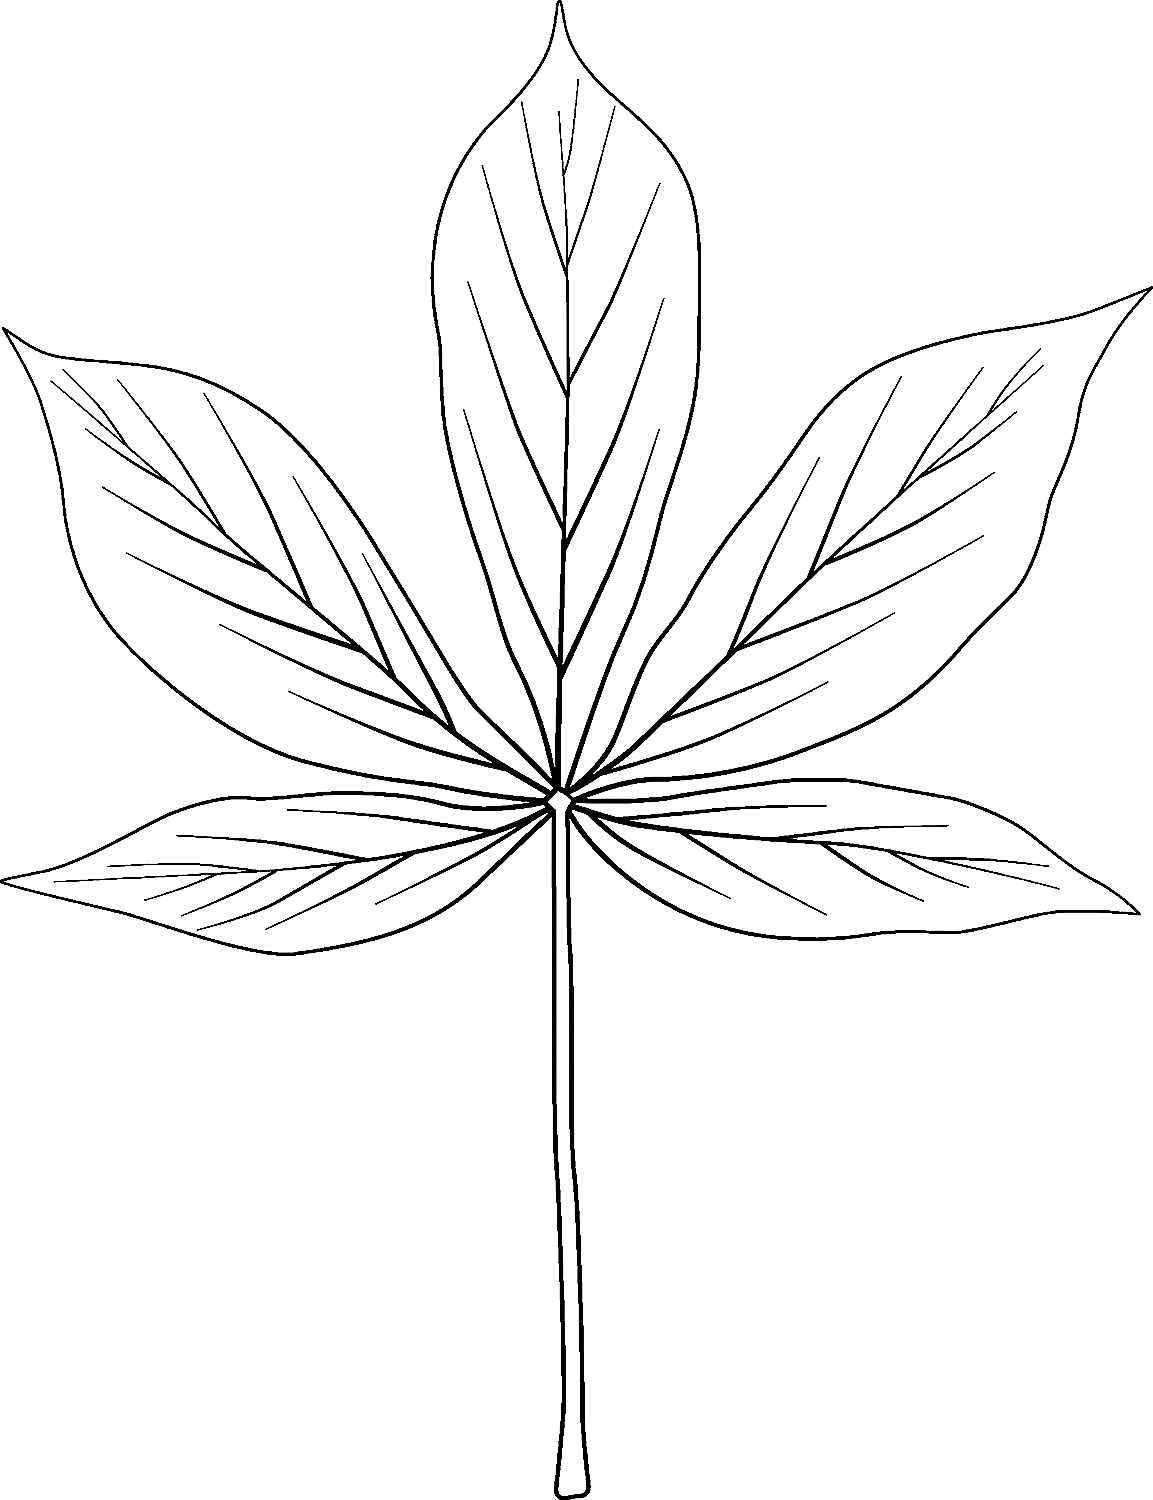 Yellow Buckeye Leaf Coloring Pages